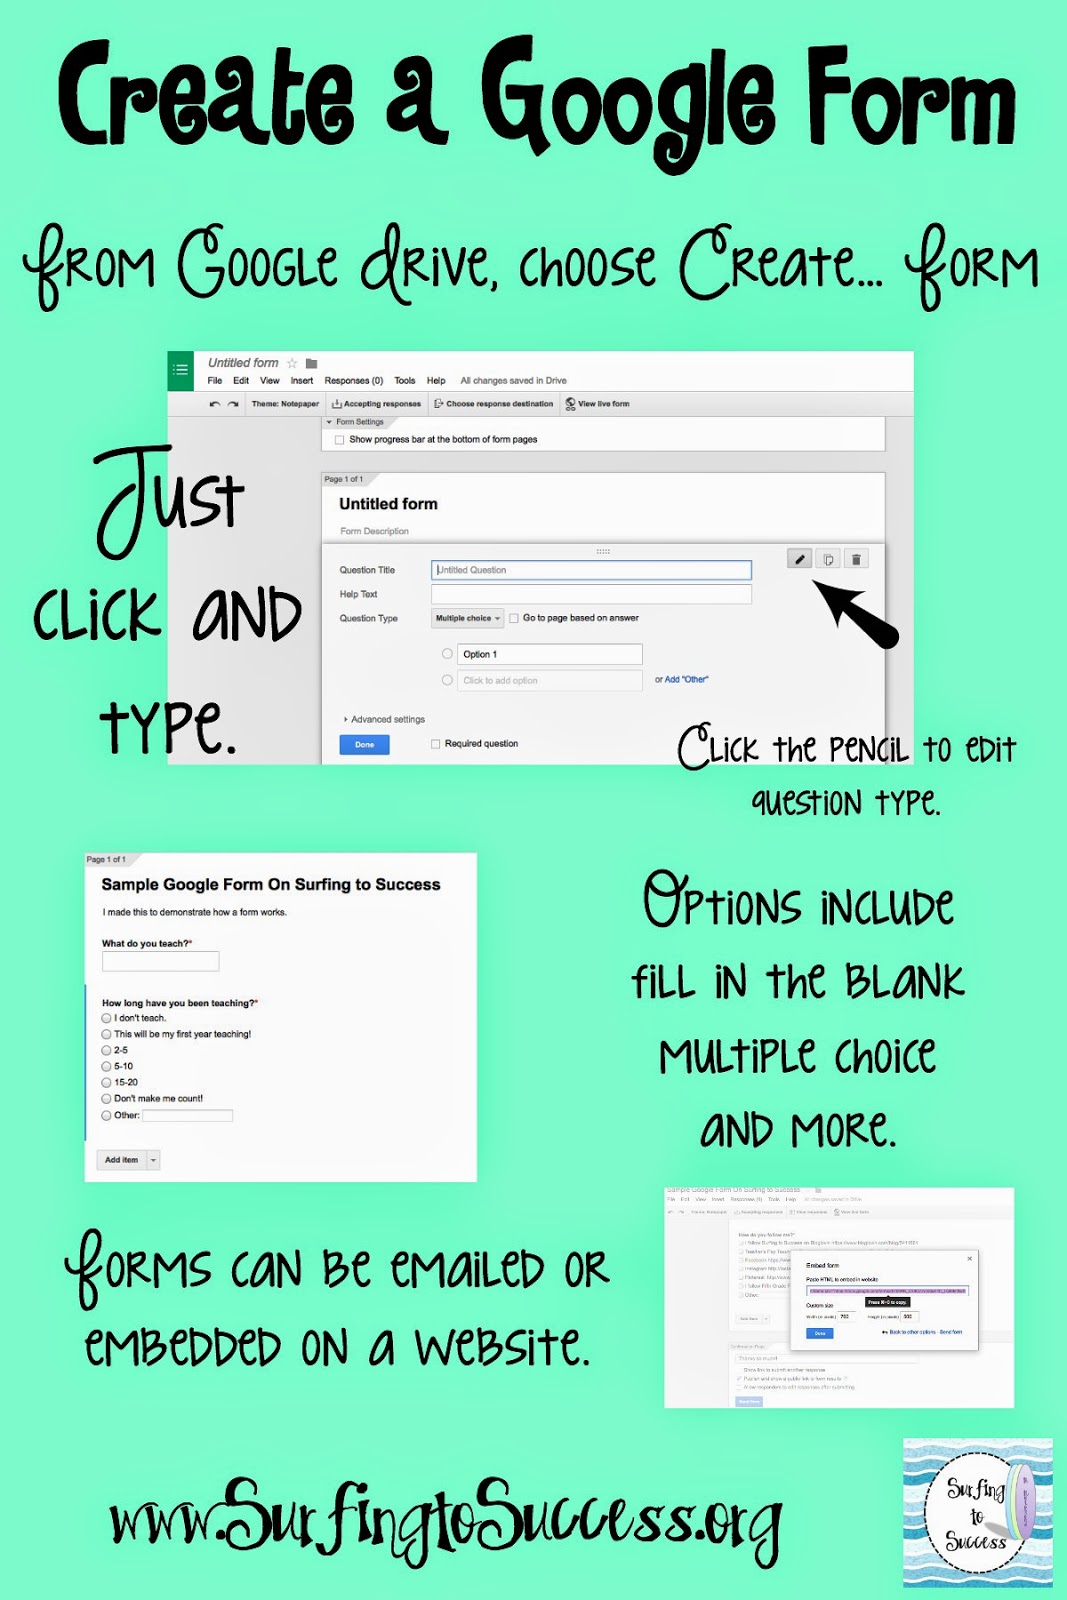 Creating a Google Form to Gather Info - Surfing to Success1067 x 1600